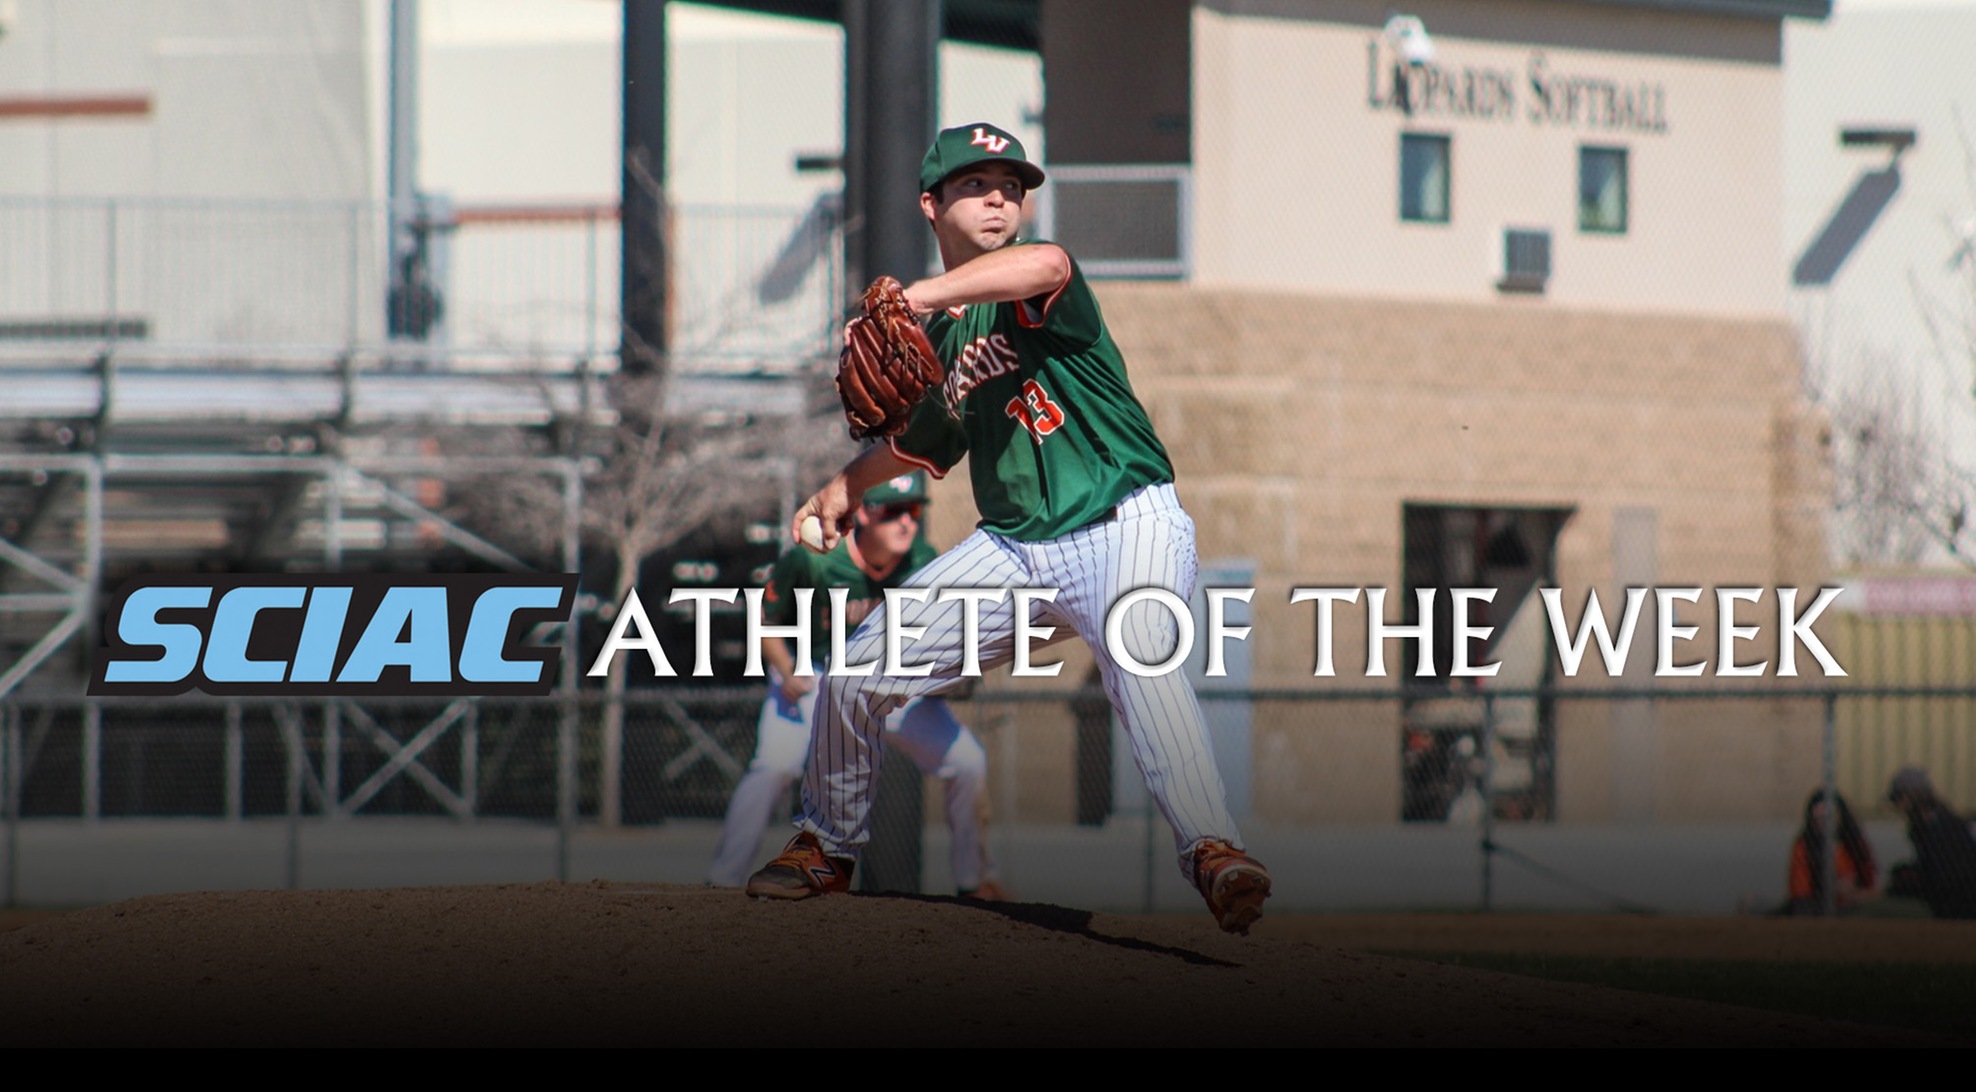 Norman tabbed SCIAC Athlete of the Week